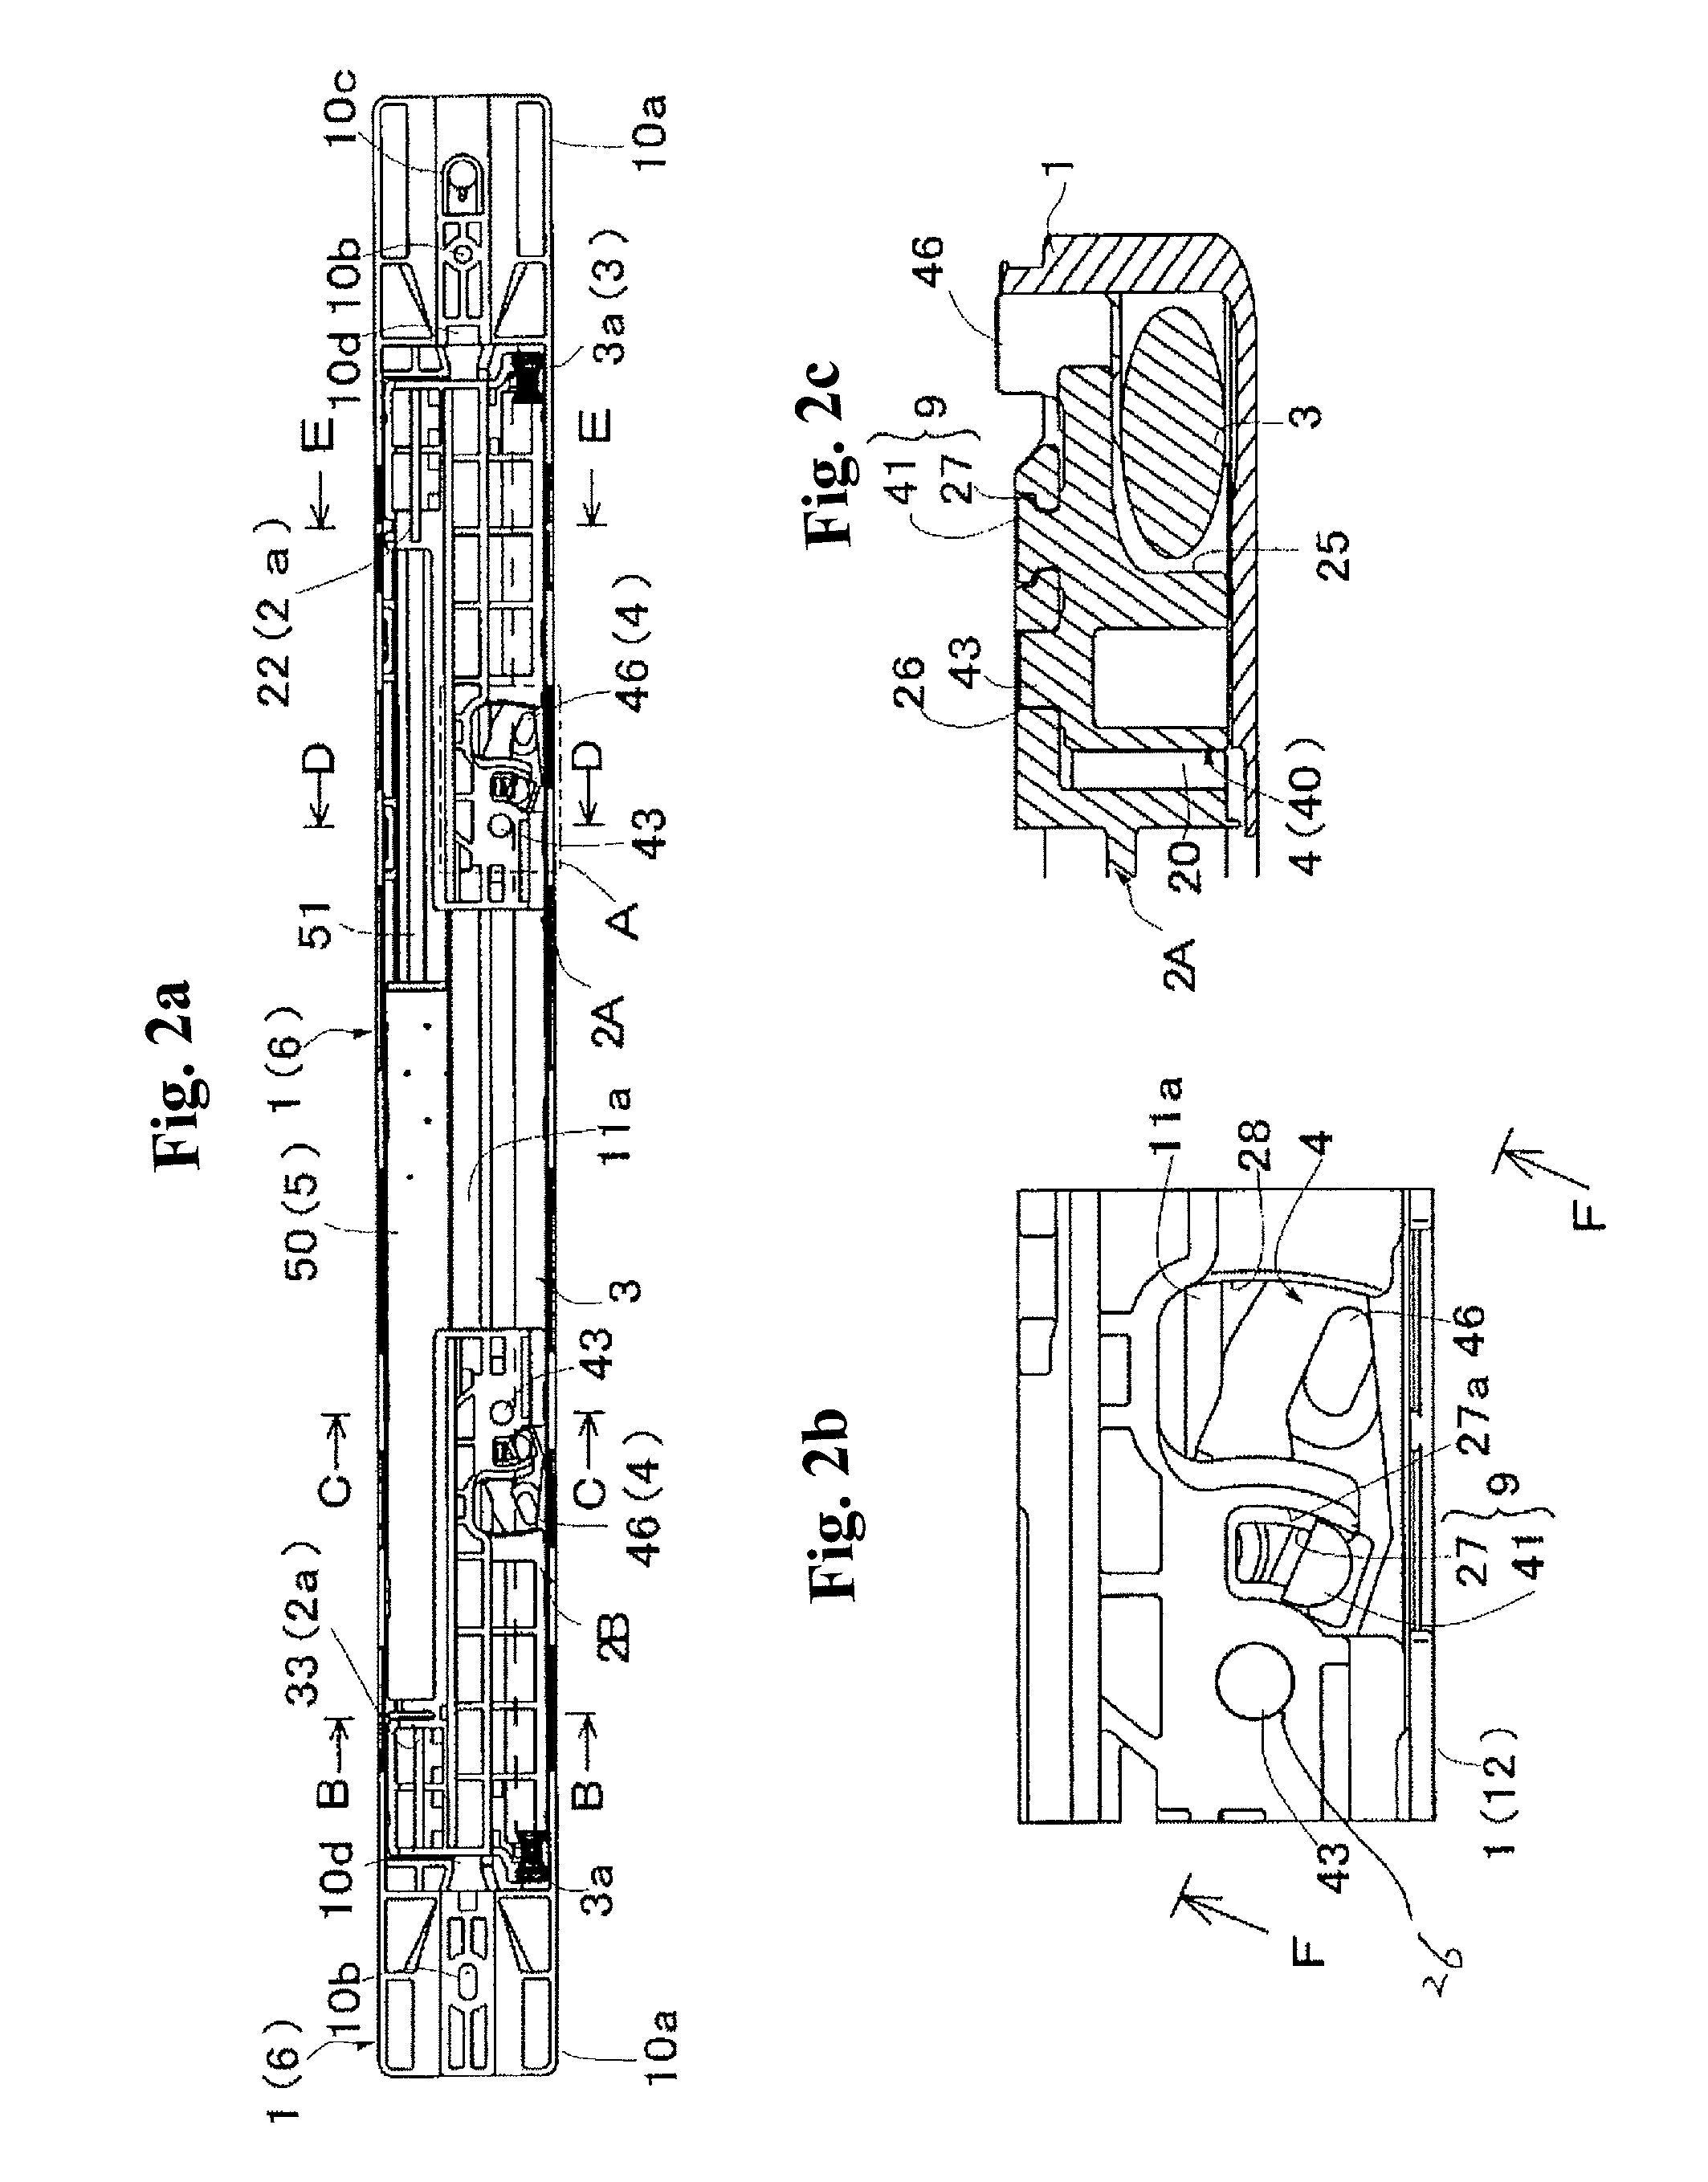 Slide assist mechanism and draw-in unit